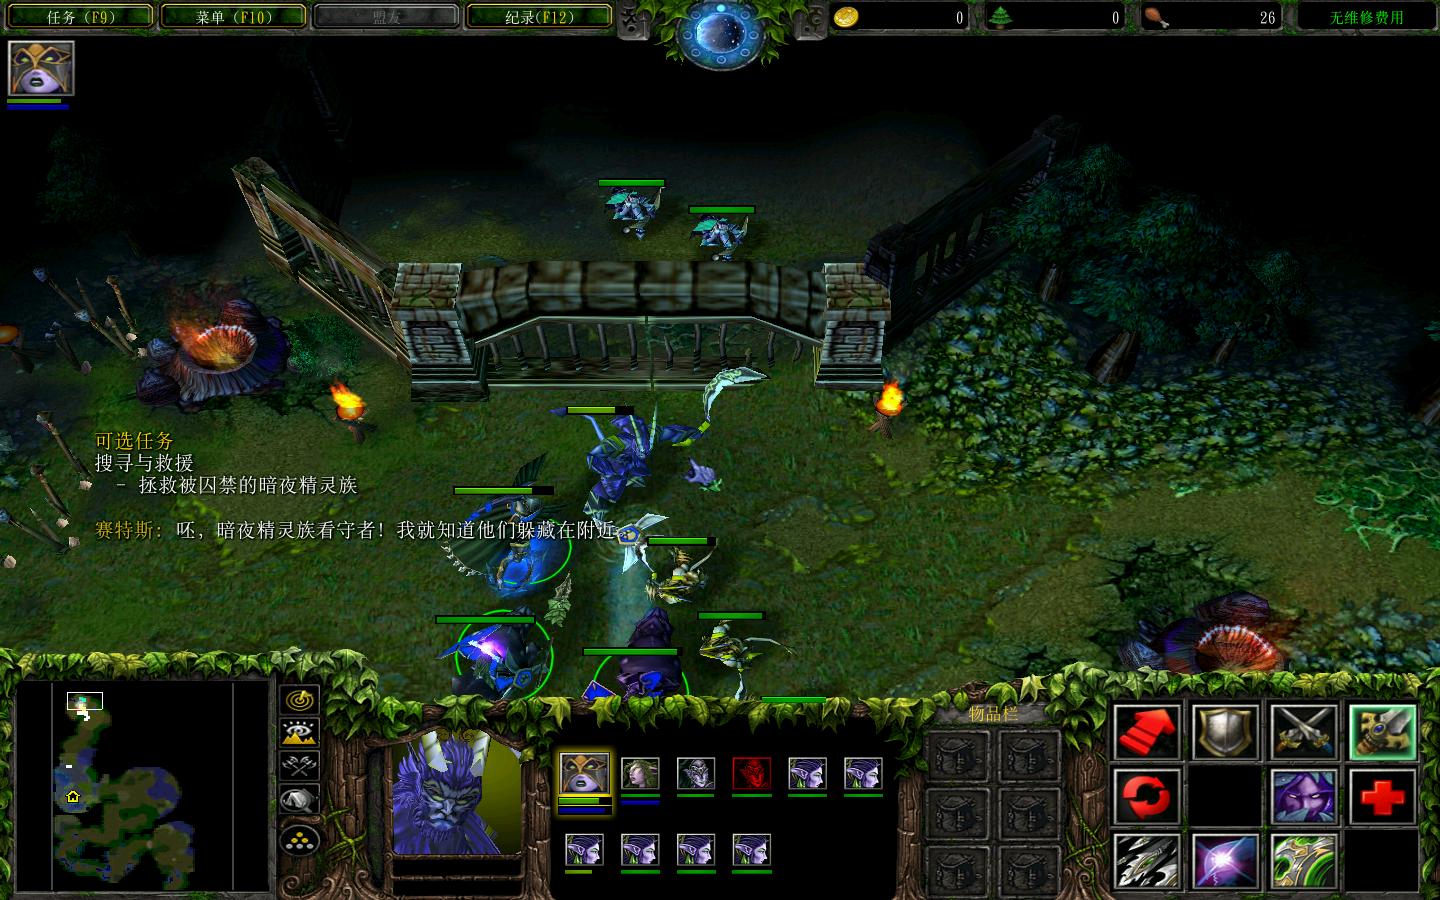 ħ3Warcraft III The Frozen Throne1.24EСϮ A4.91޸